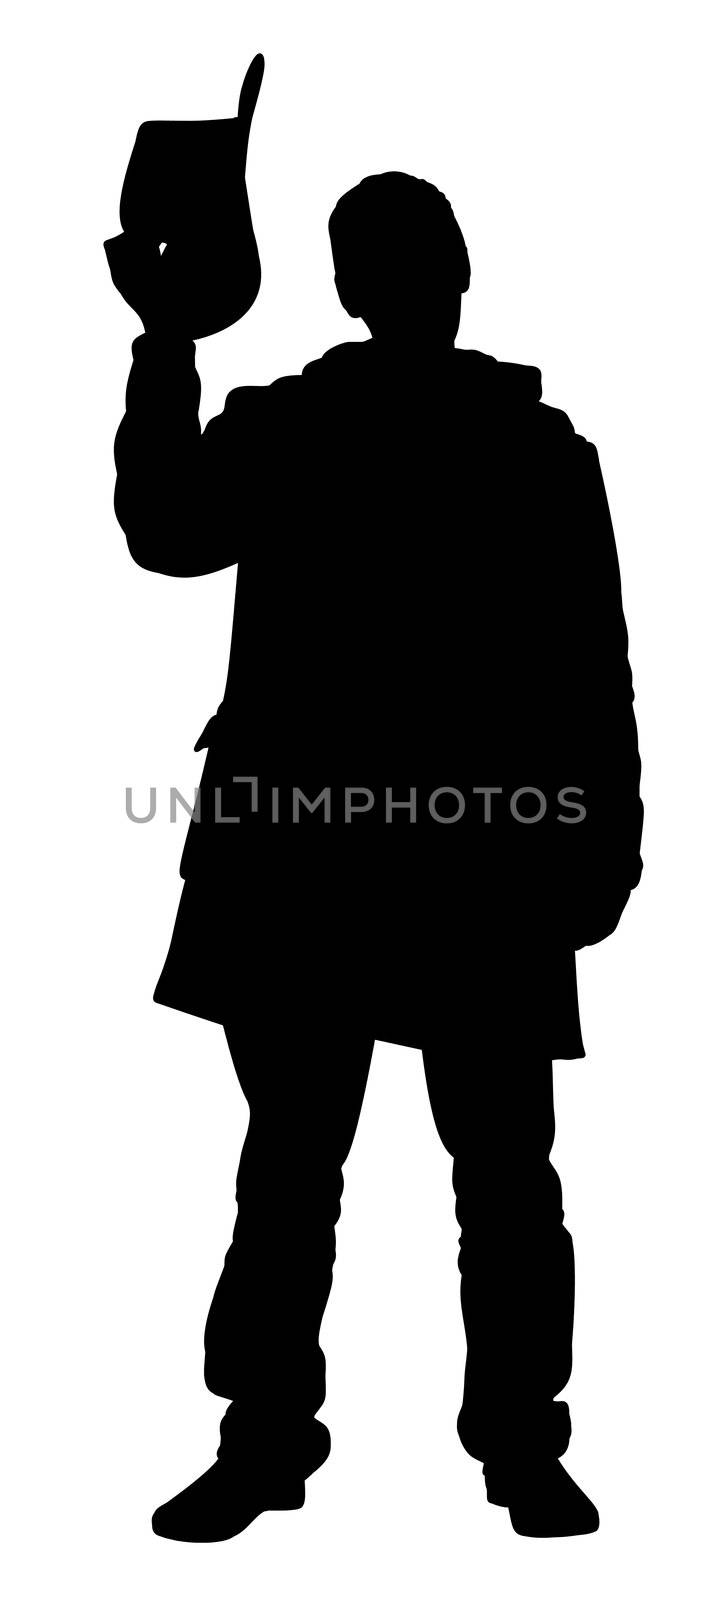 Illustrated Silhouette of a cowboy raising his hat